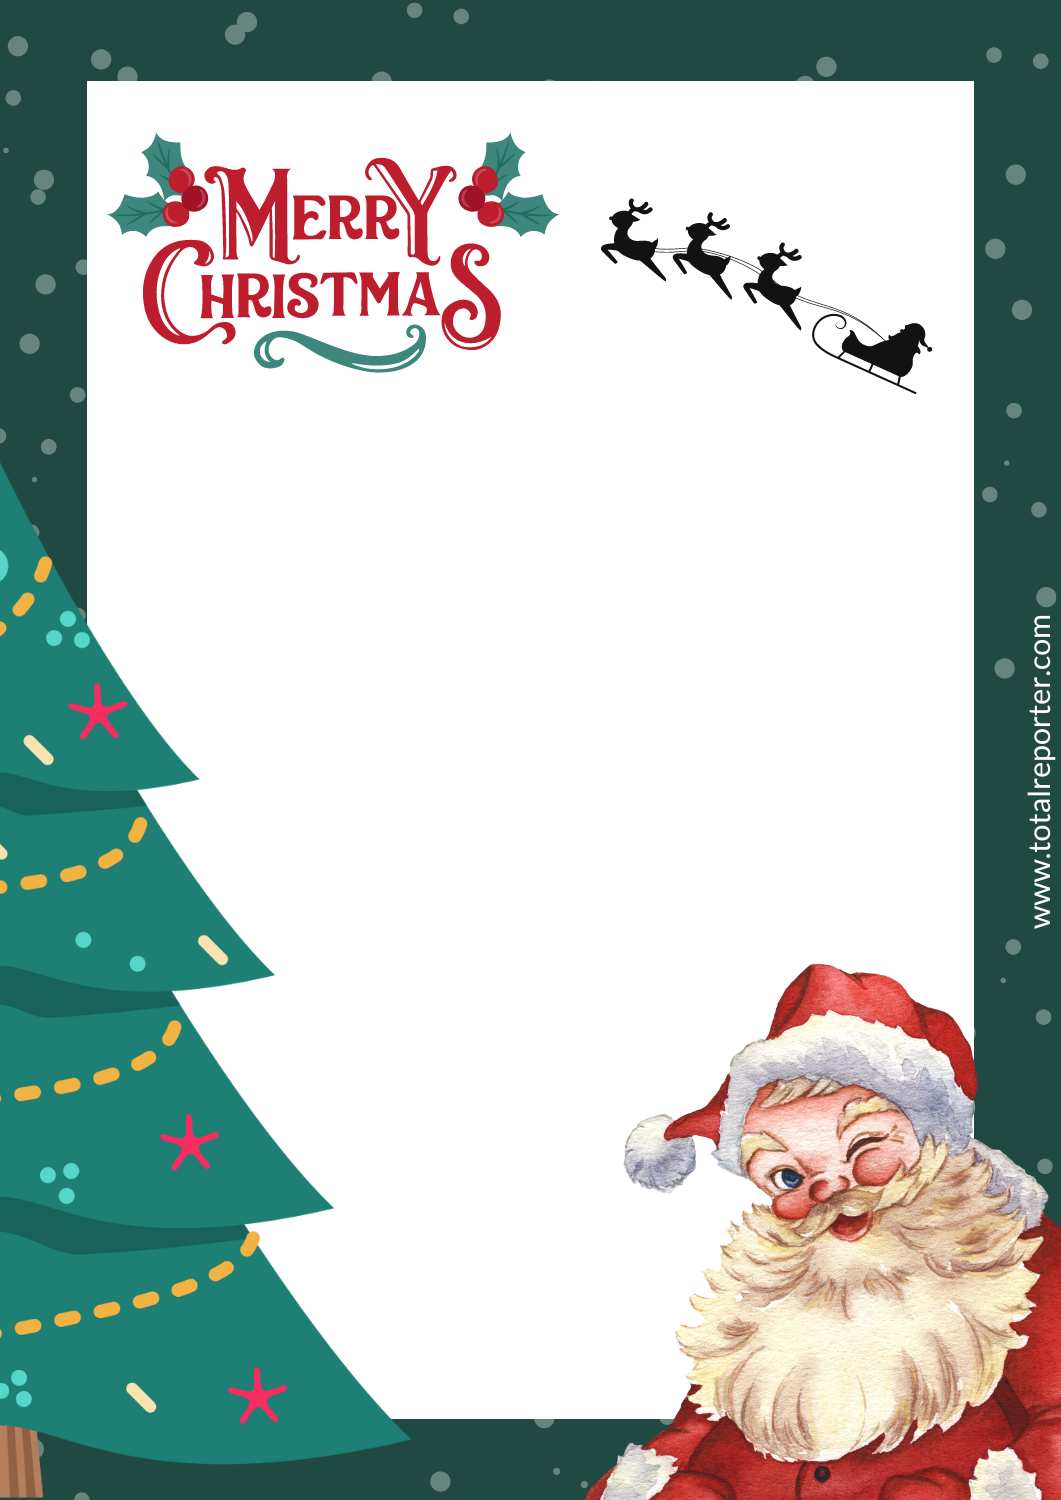 Background Images for Christmas